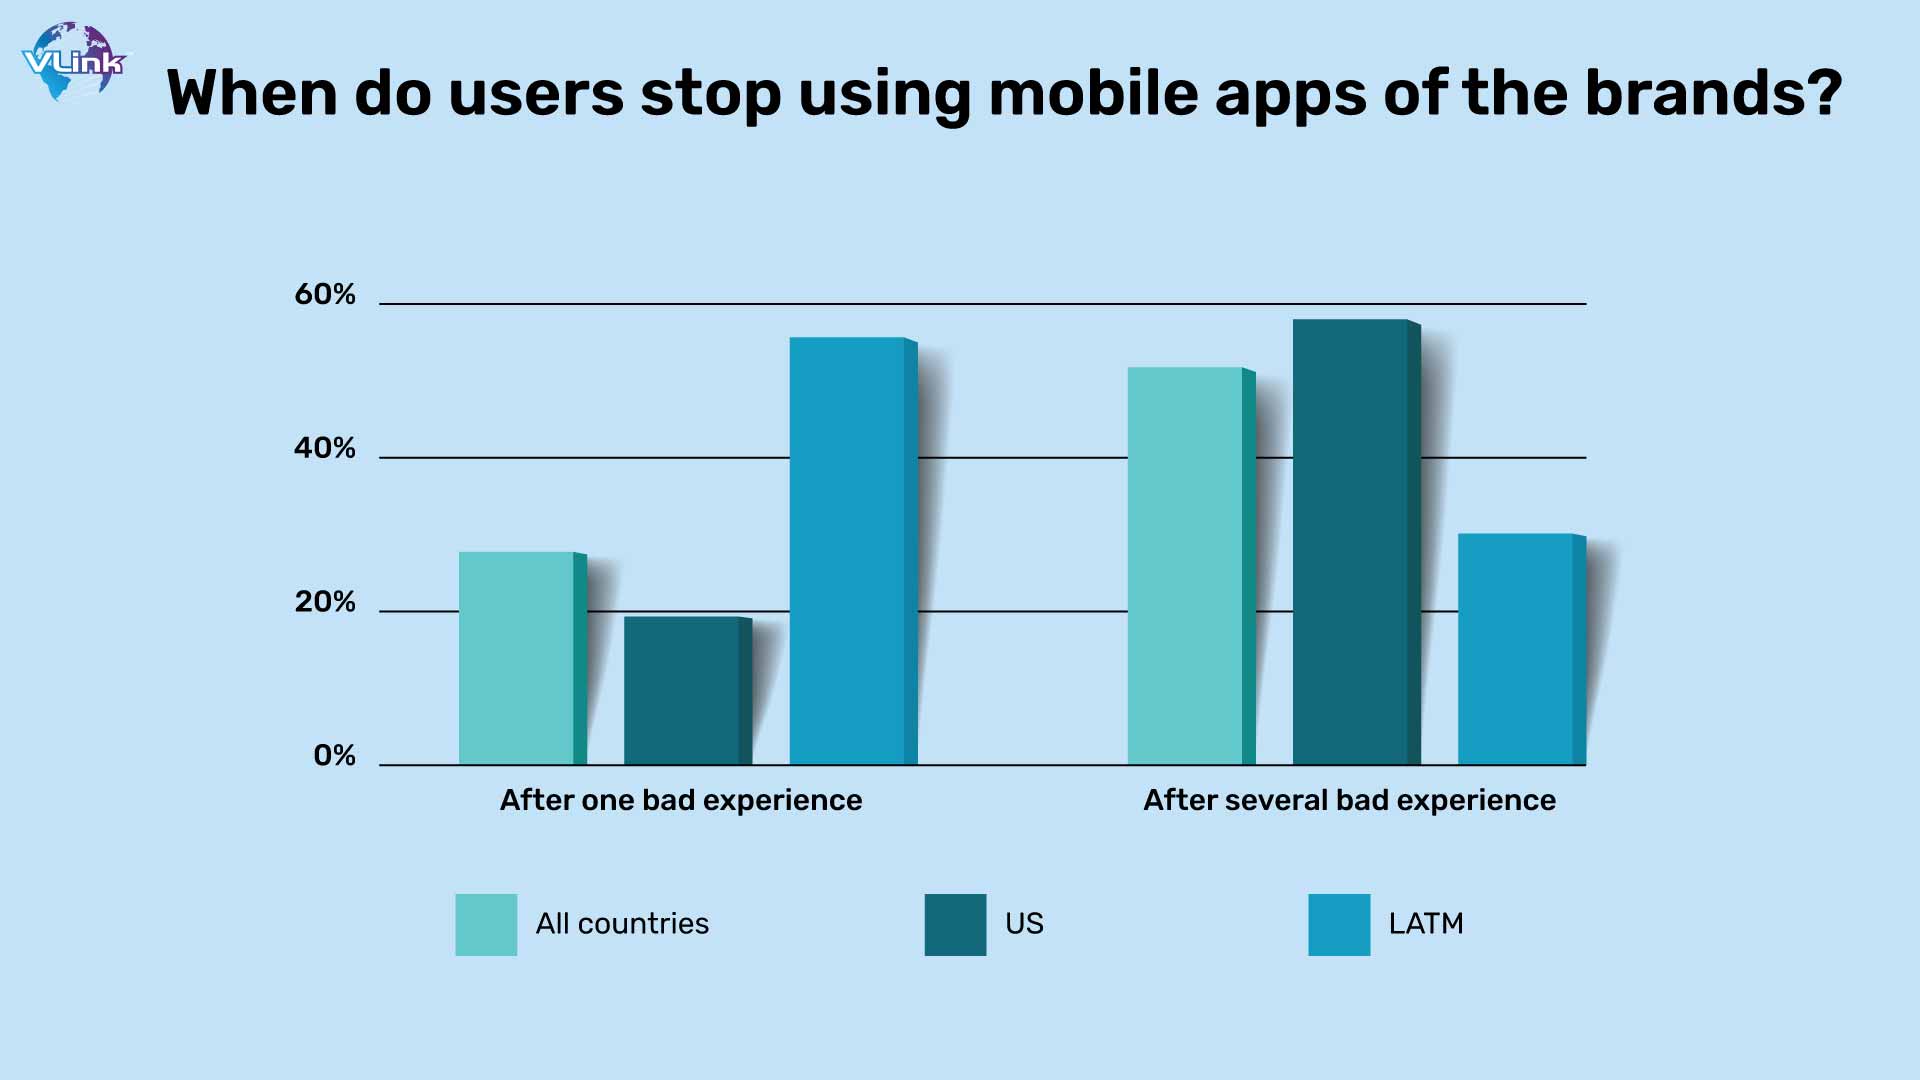 When do users stop using mobile apps of the brands